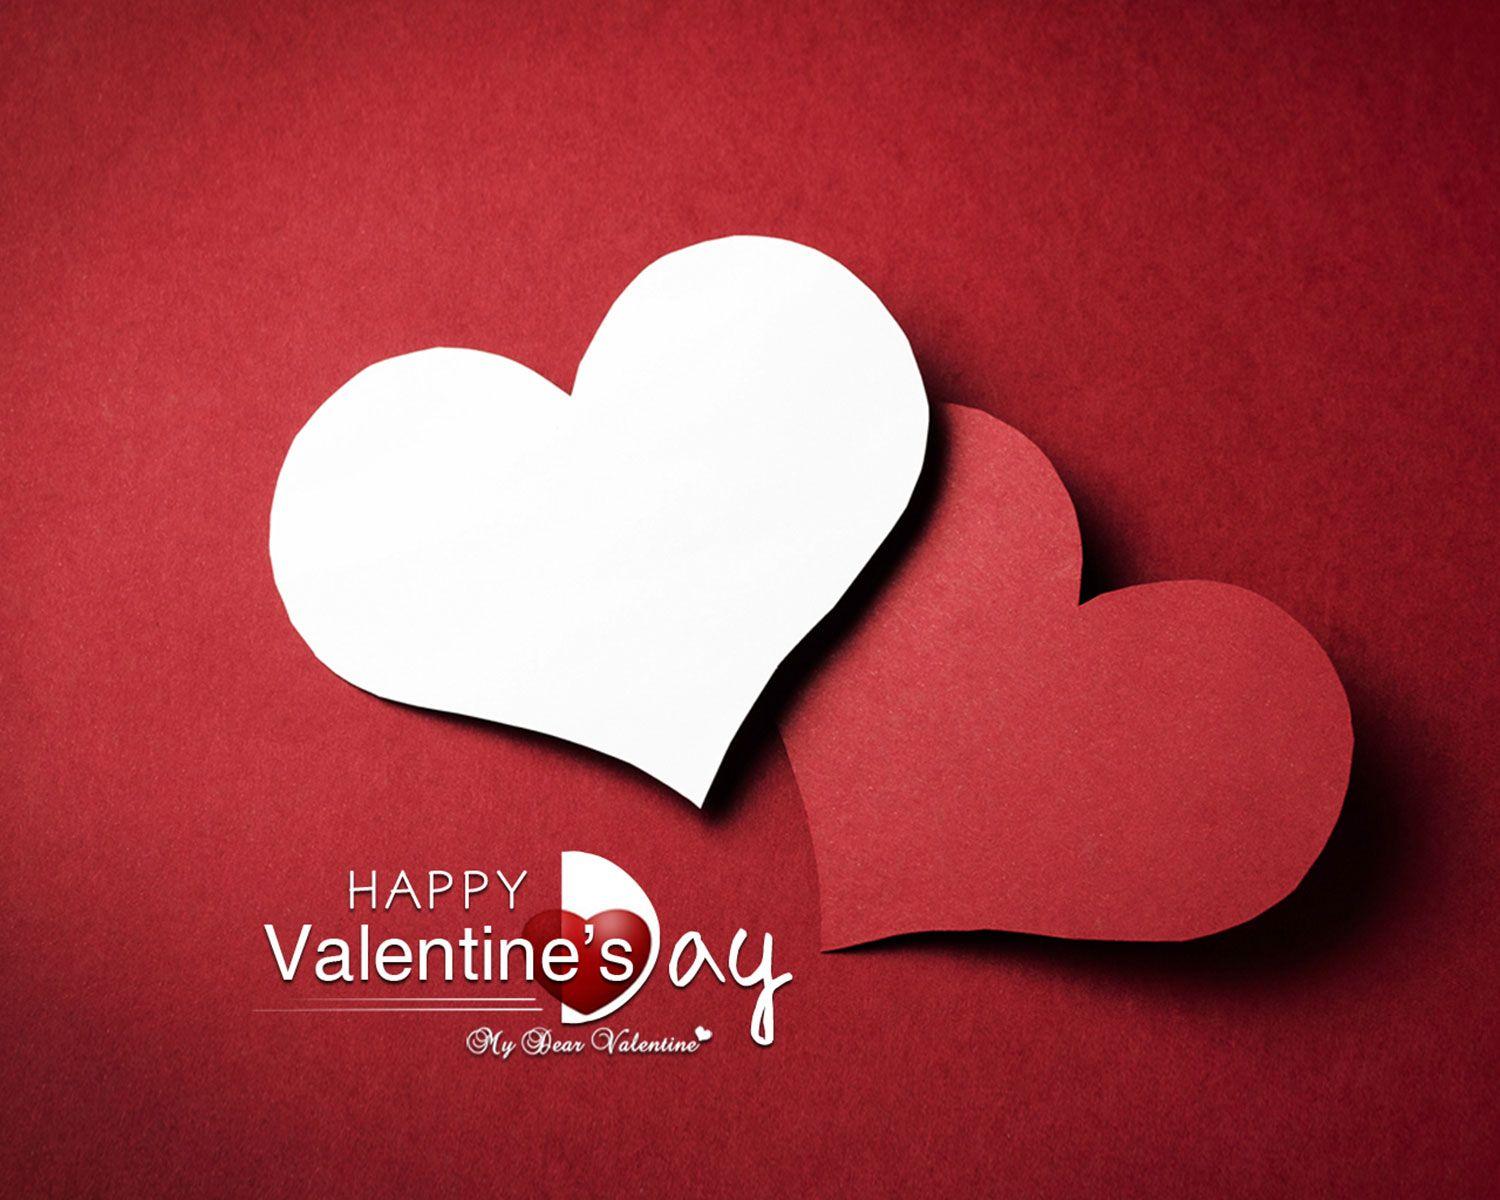 Valentine's Day HD Wallpapers - Wallpaper Cave